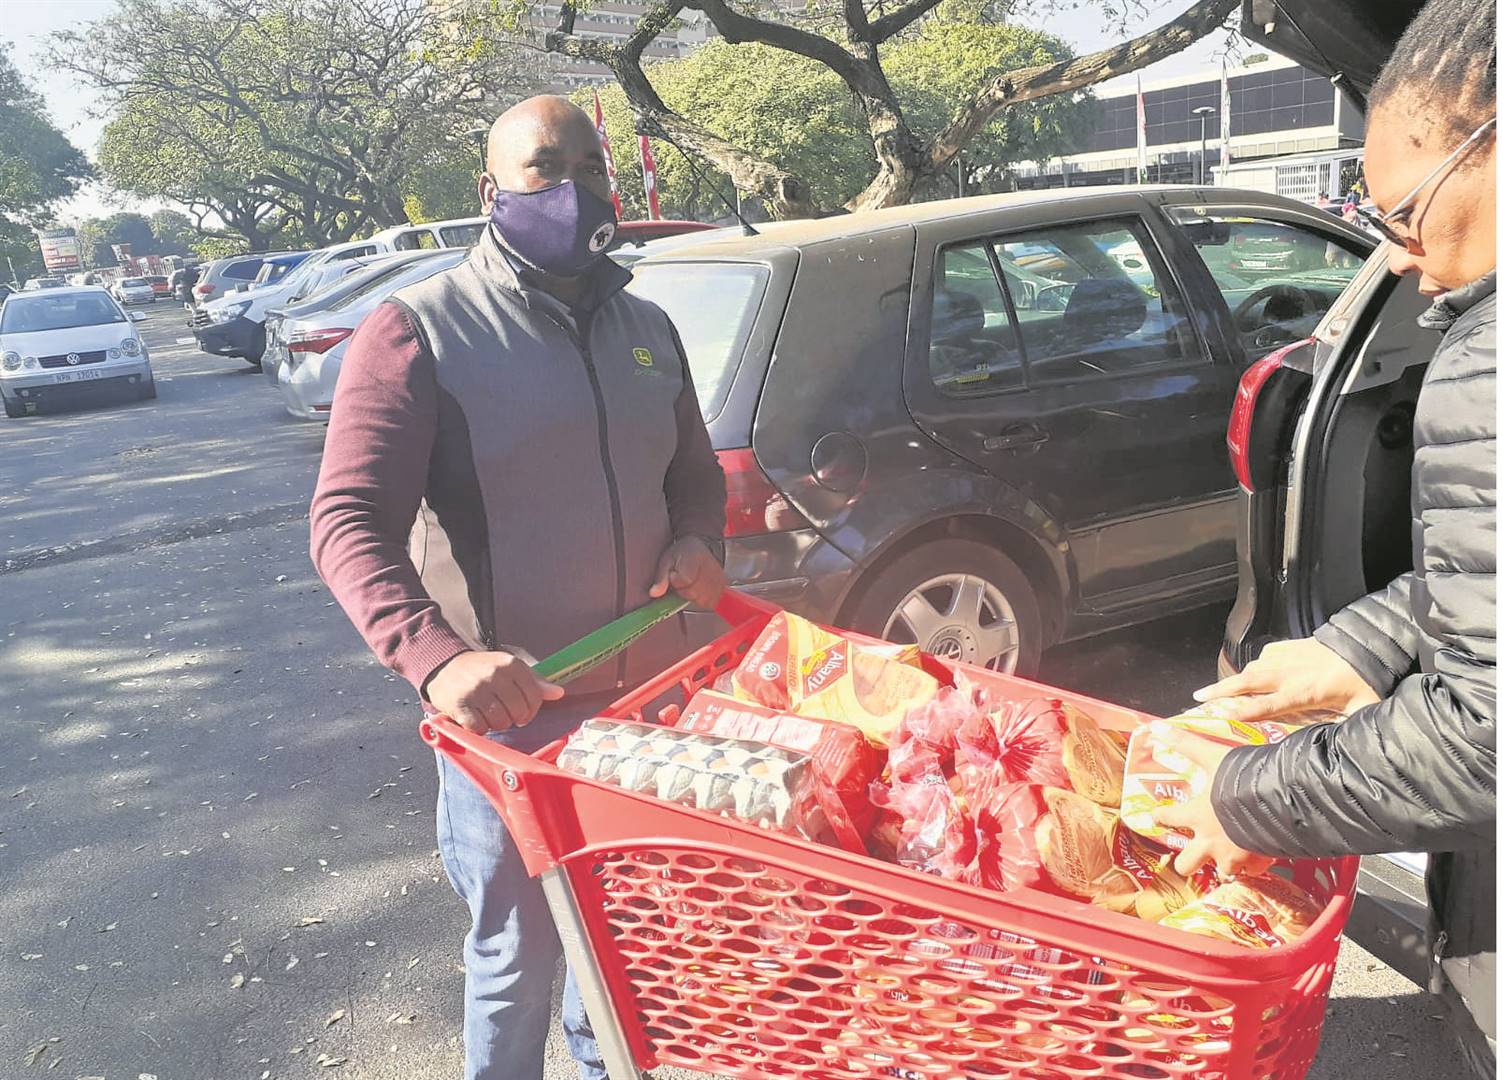 Pinetown resident Solly Ngcobo leaves a shop with a trolley full of bread. He said he hasn’t been able to buy bread for days and was stocking up in case there was another shortage.